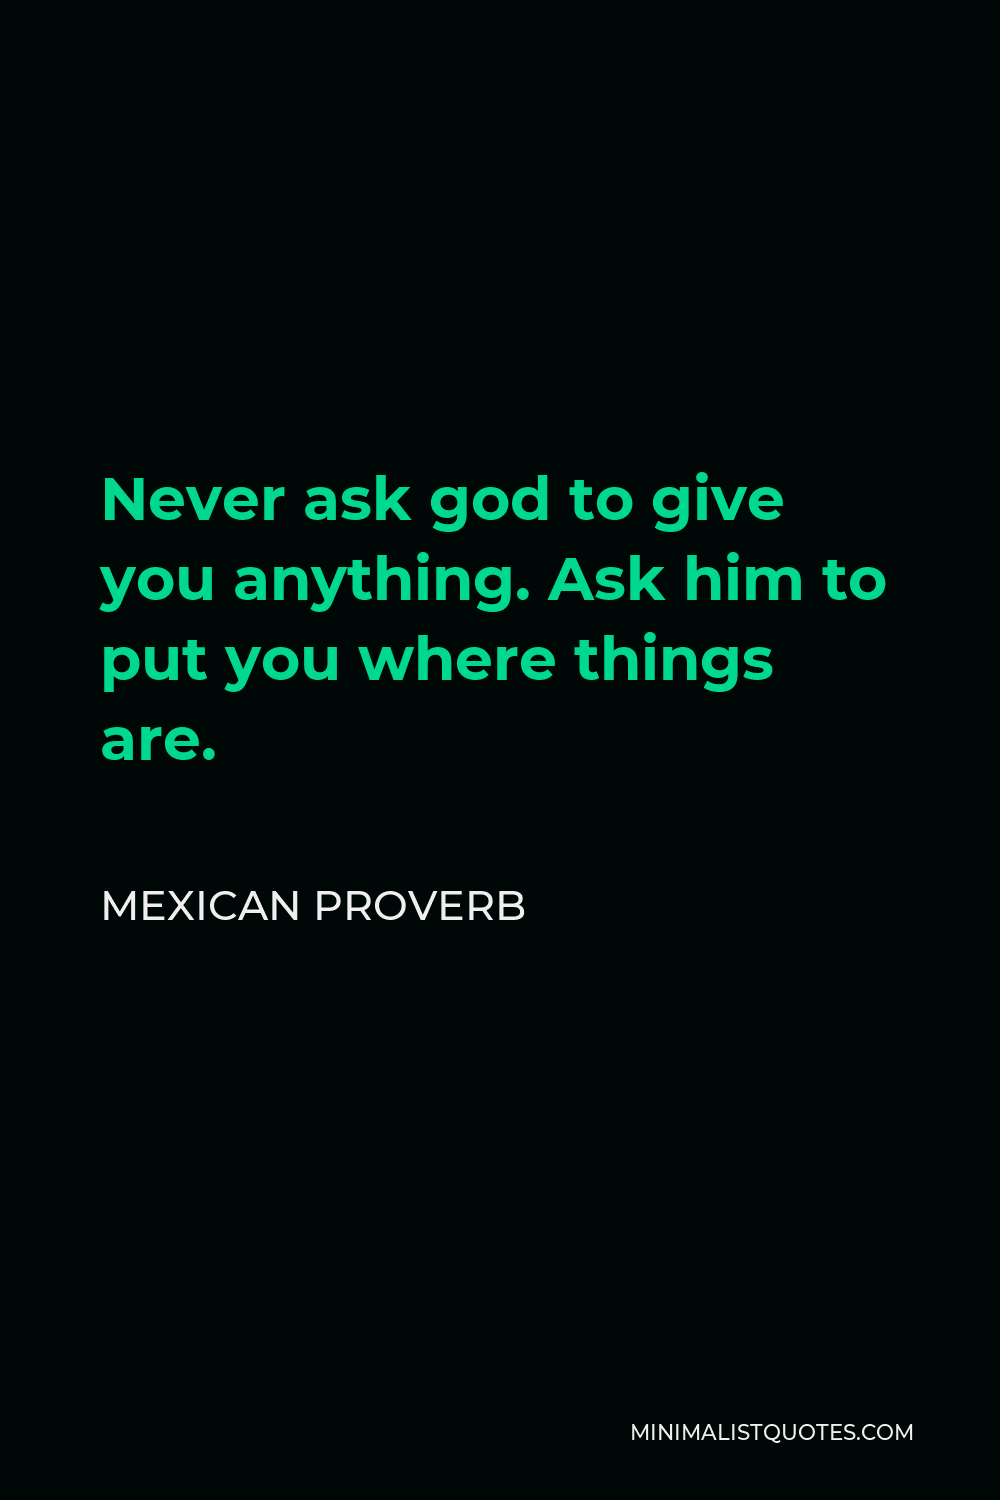 Mexican Proverb Quote - Never ask god to give you anything. Ask him to put you where things are.